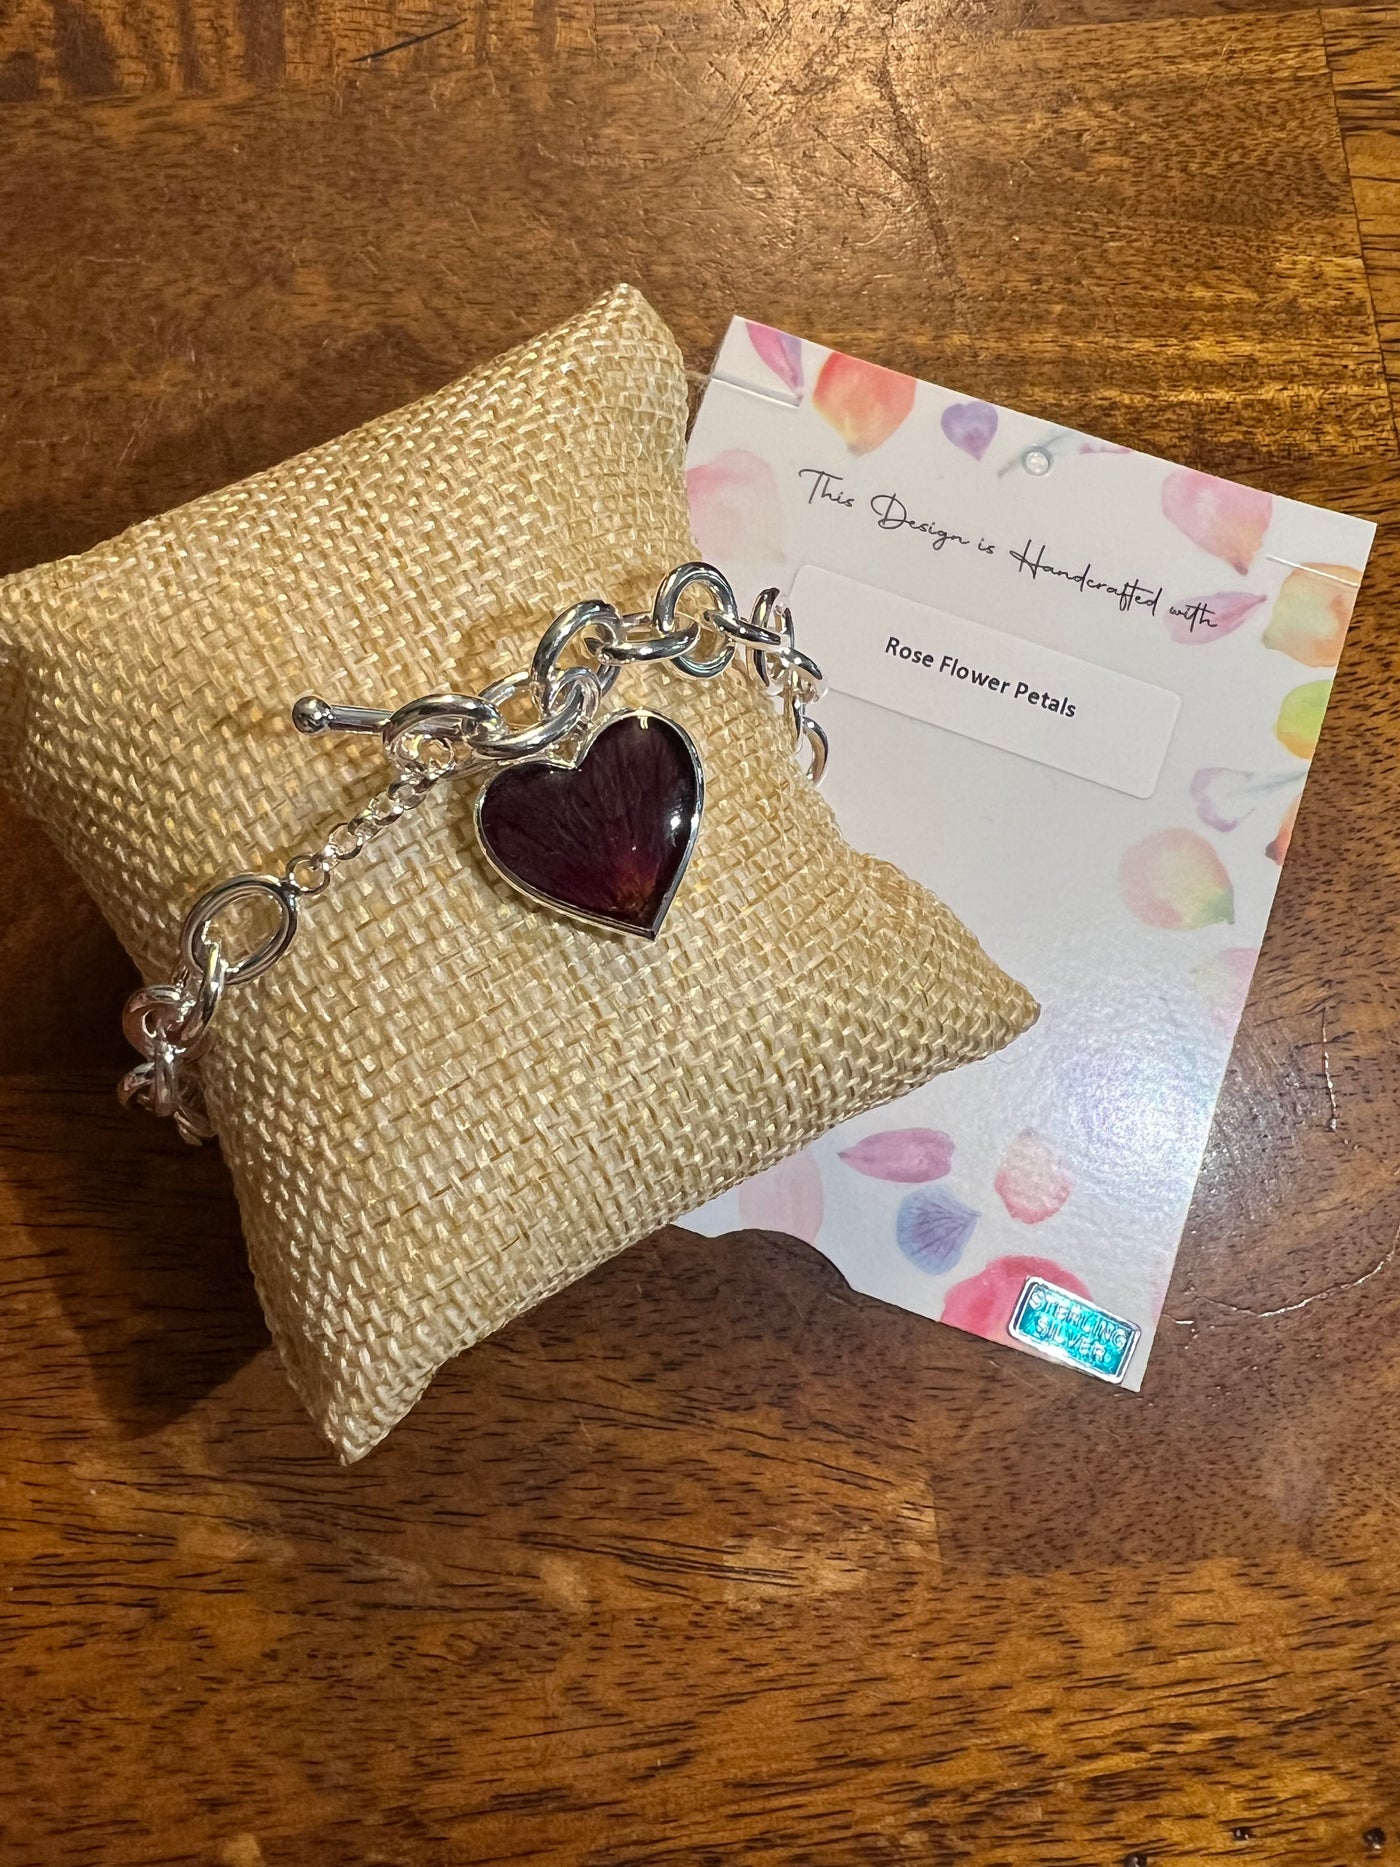 Full Heart Toggle Bracelet with Rose Petals